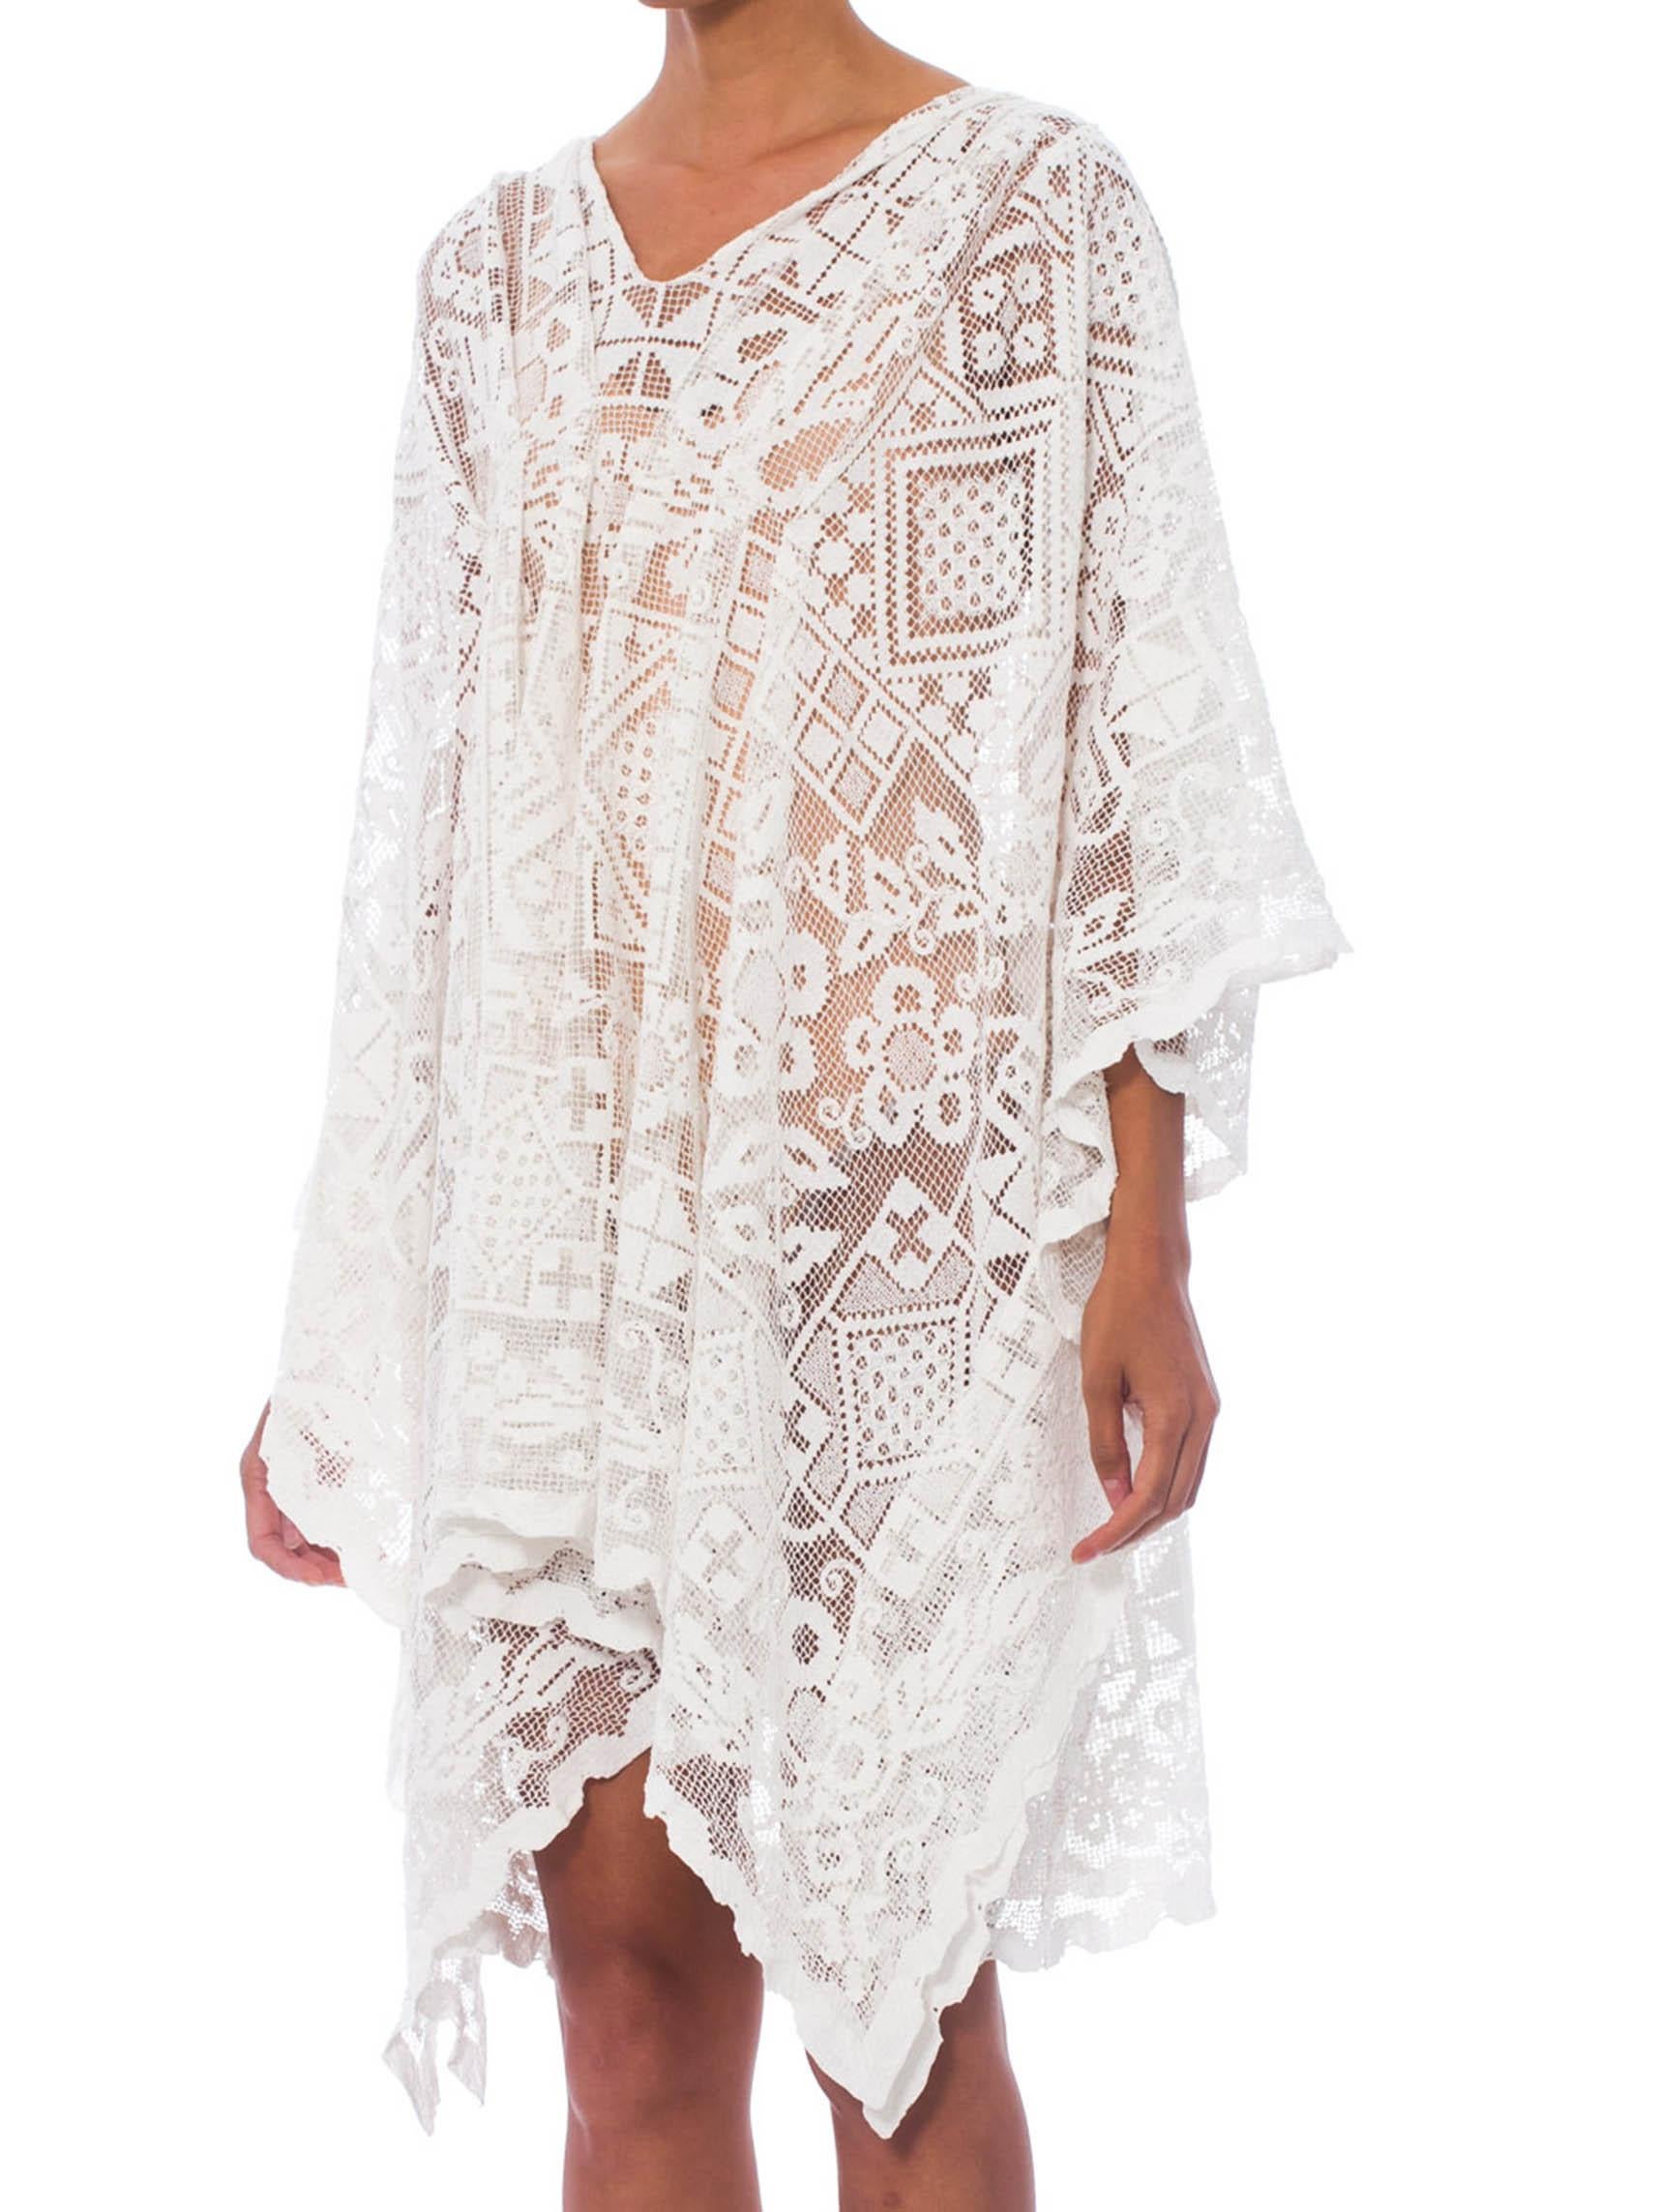 MORPHEW COLLECTION White Cotton Handmade Filet Lace Kaftan Tunic Beach Cover-Up 1